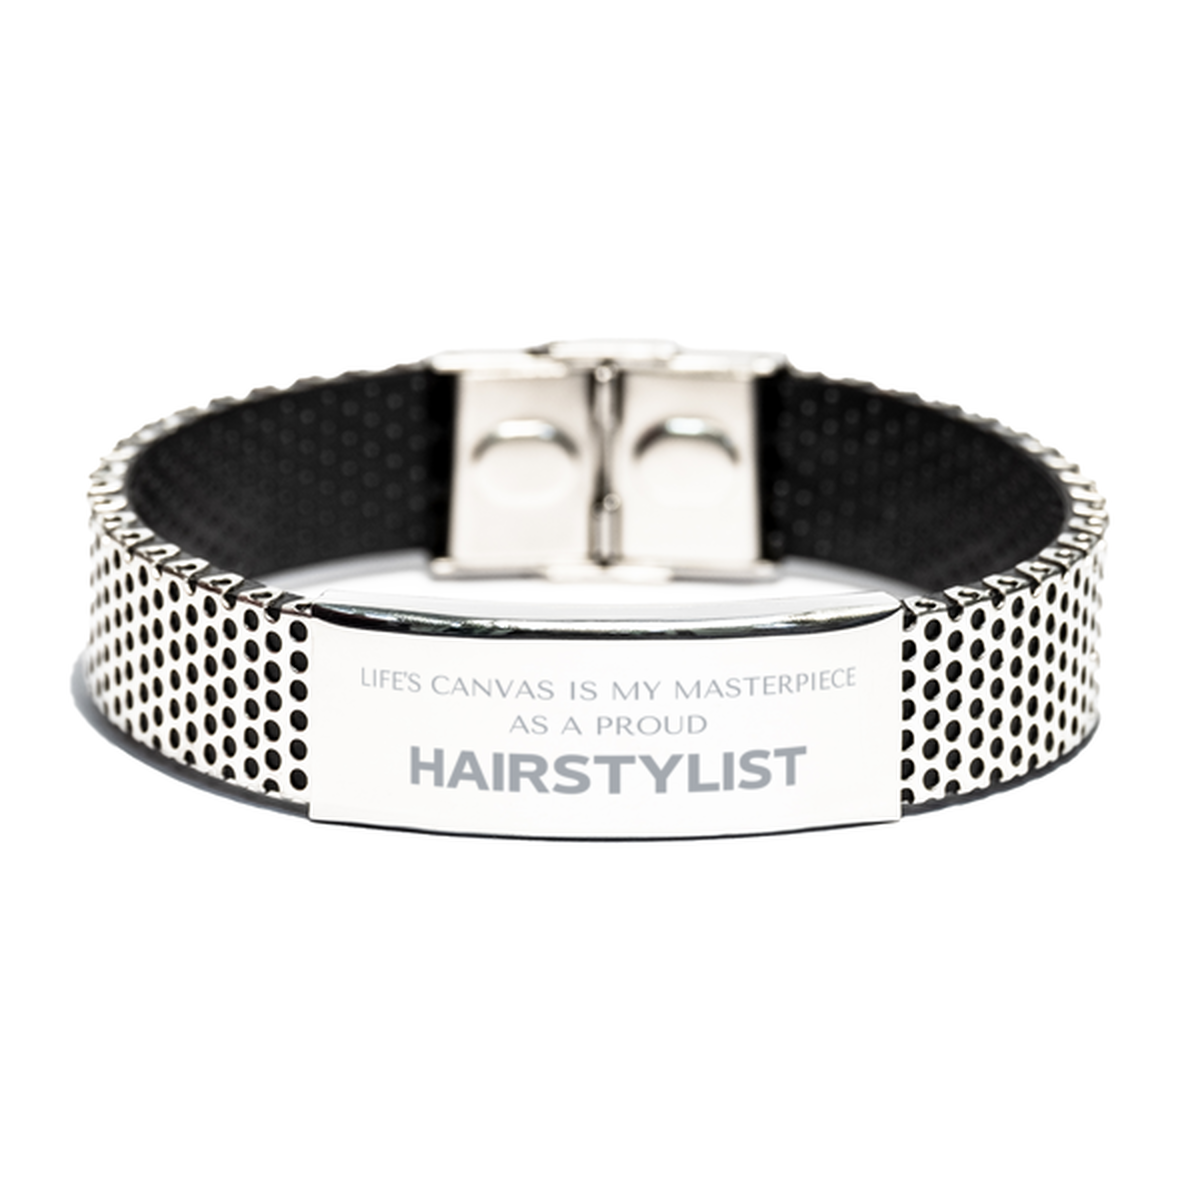 Proud Hairstylist Gifts, Life's canvas is my masterpiece, Epic Birthday Christmas Unique Stainless Steel Bracelet For Hairstylist, Coworkers, Men, Women, Friends